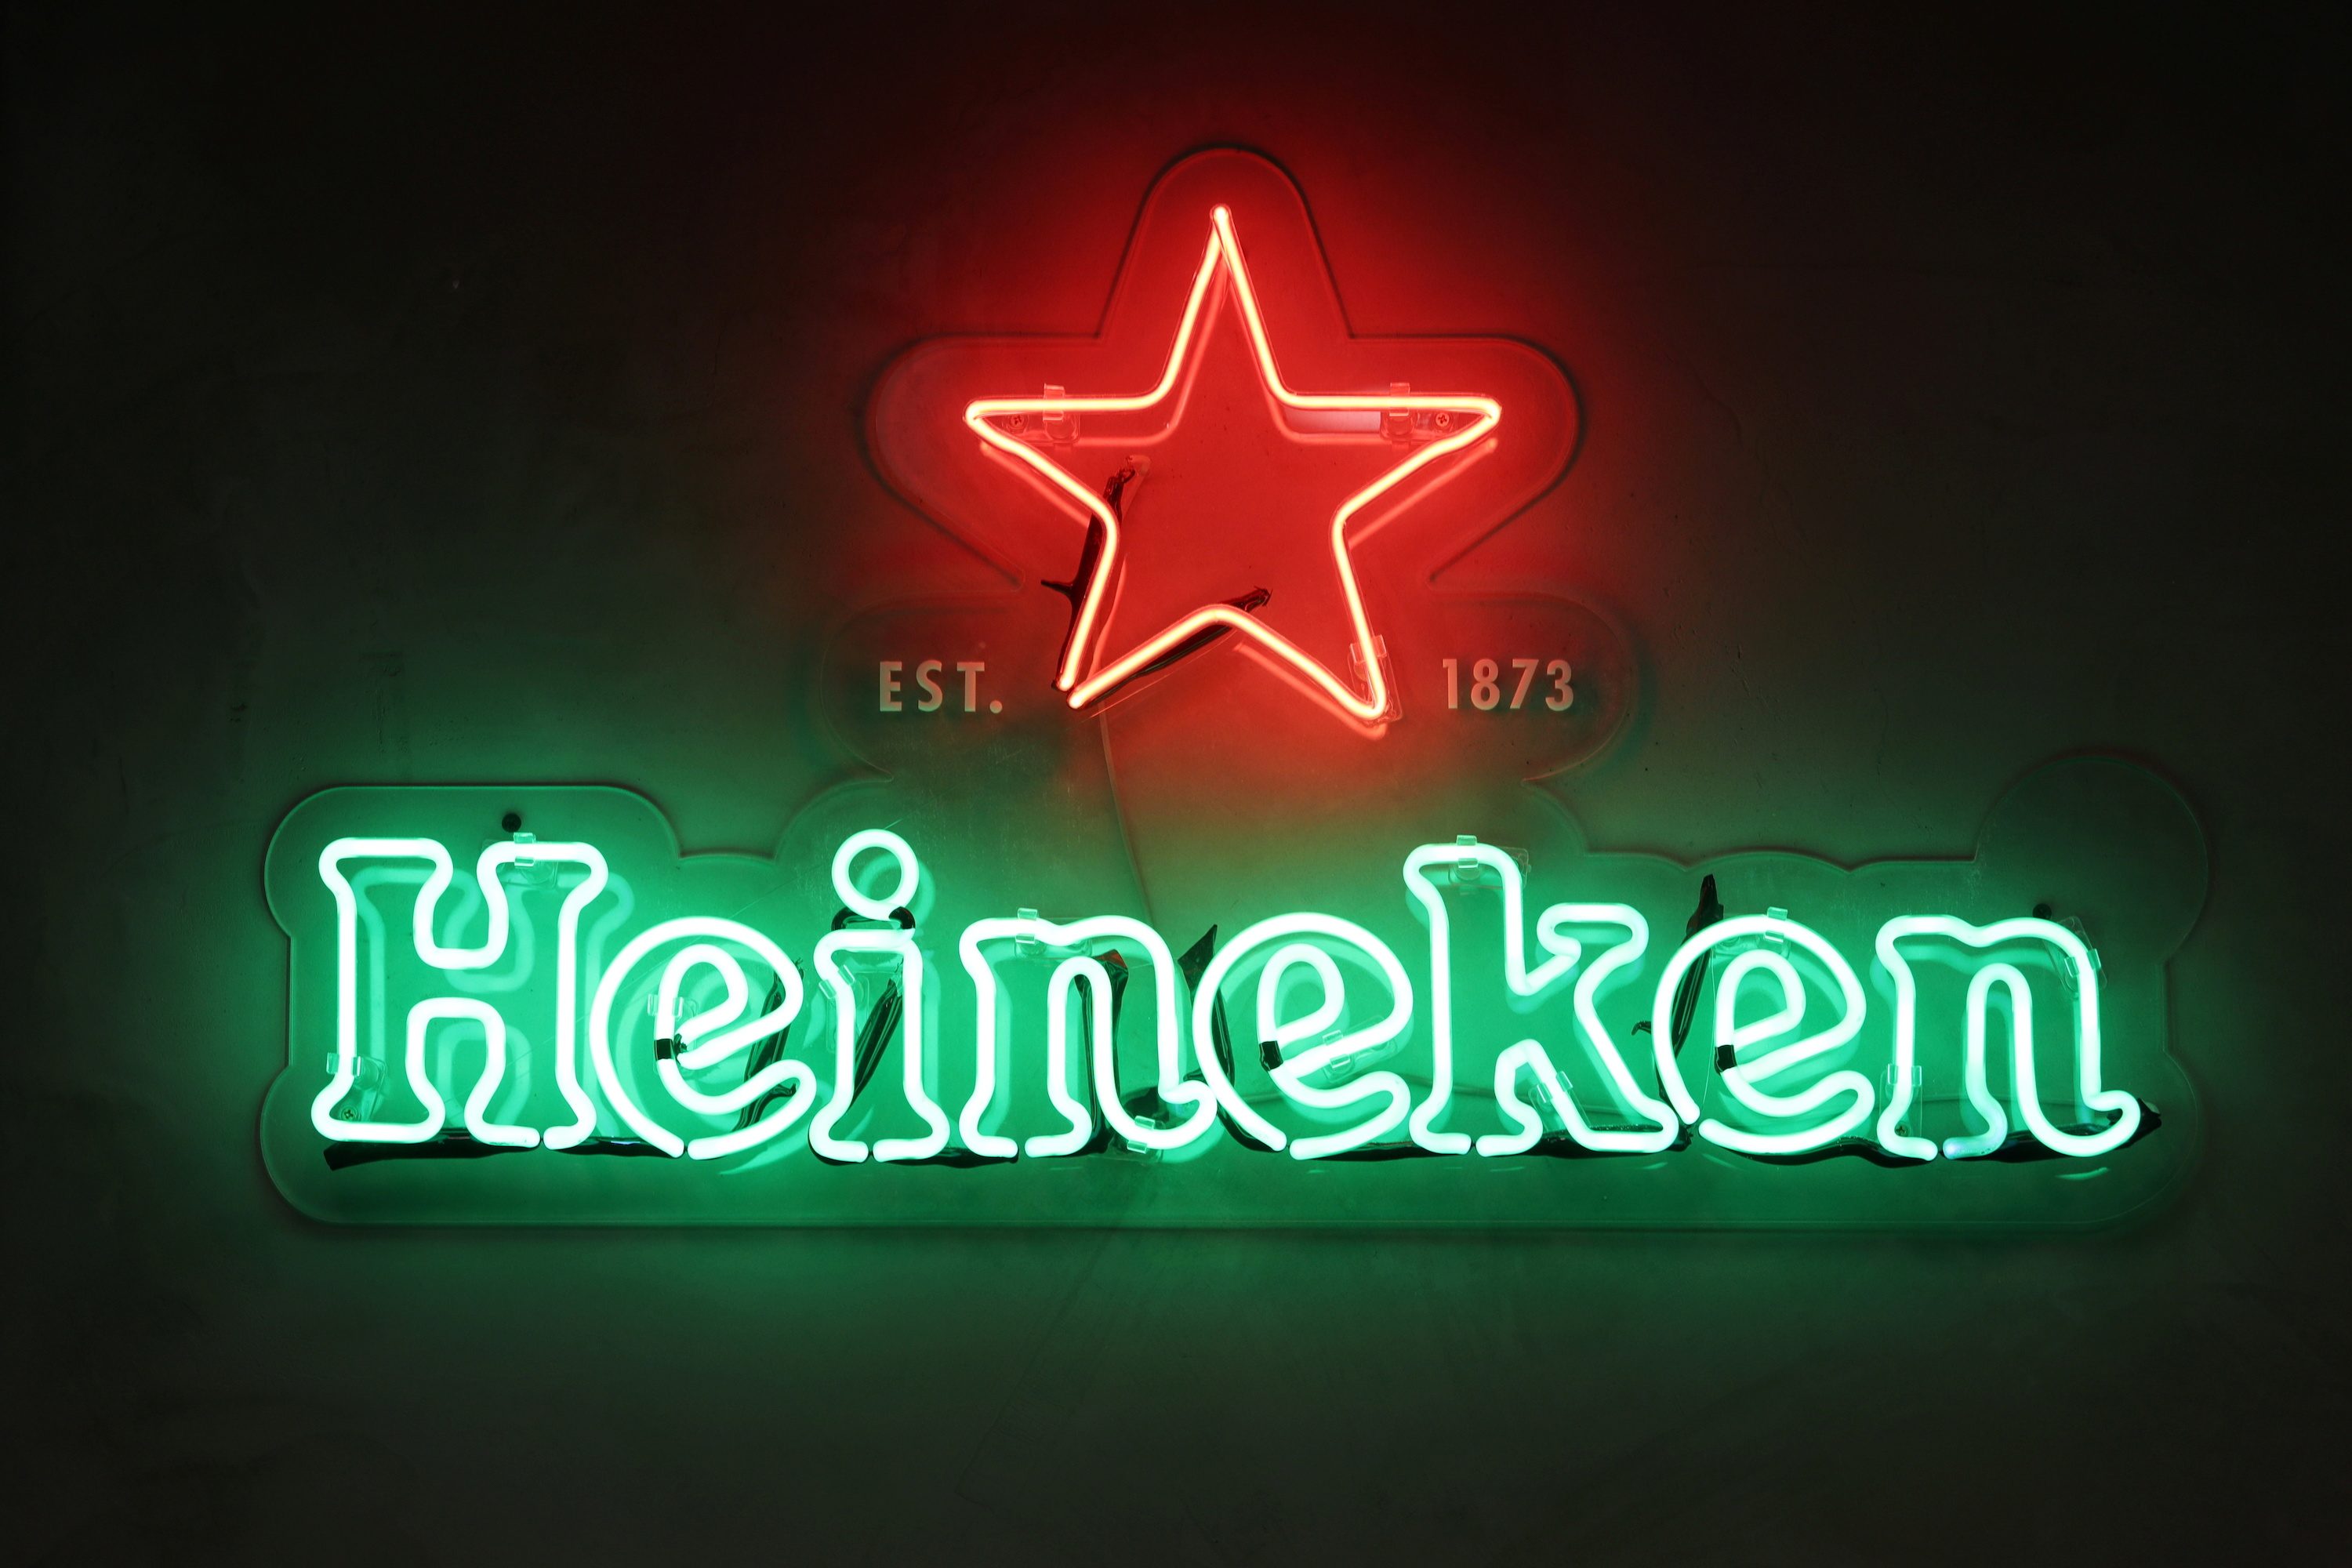 Heineken to buy South Africa’s Distell and Namibian Breweries